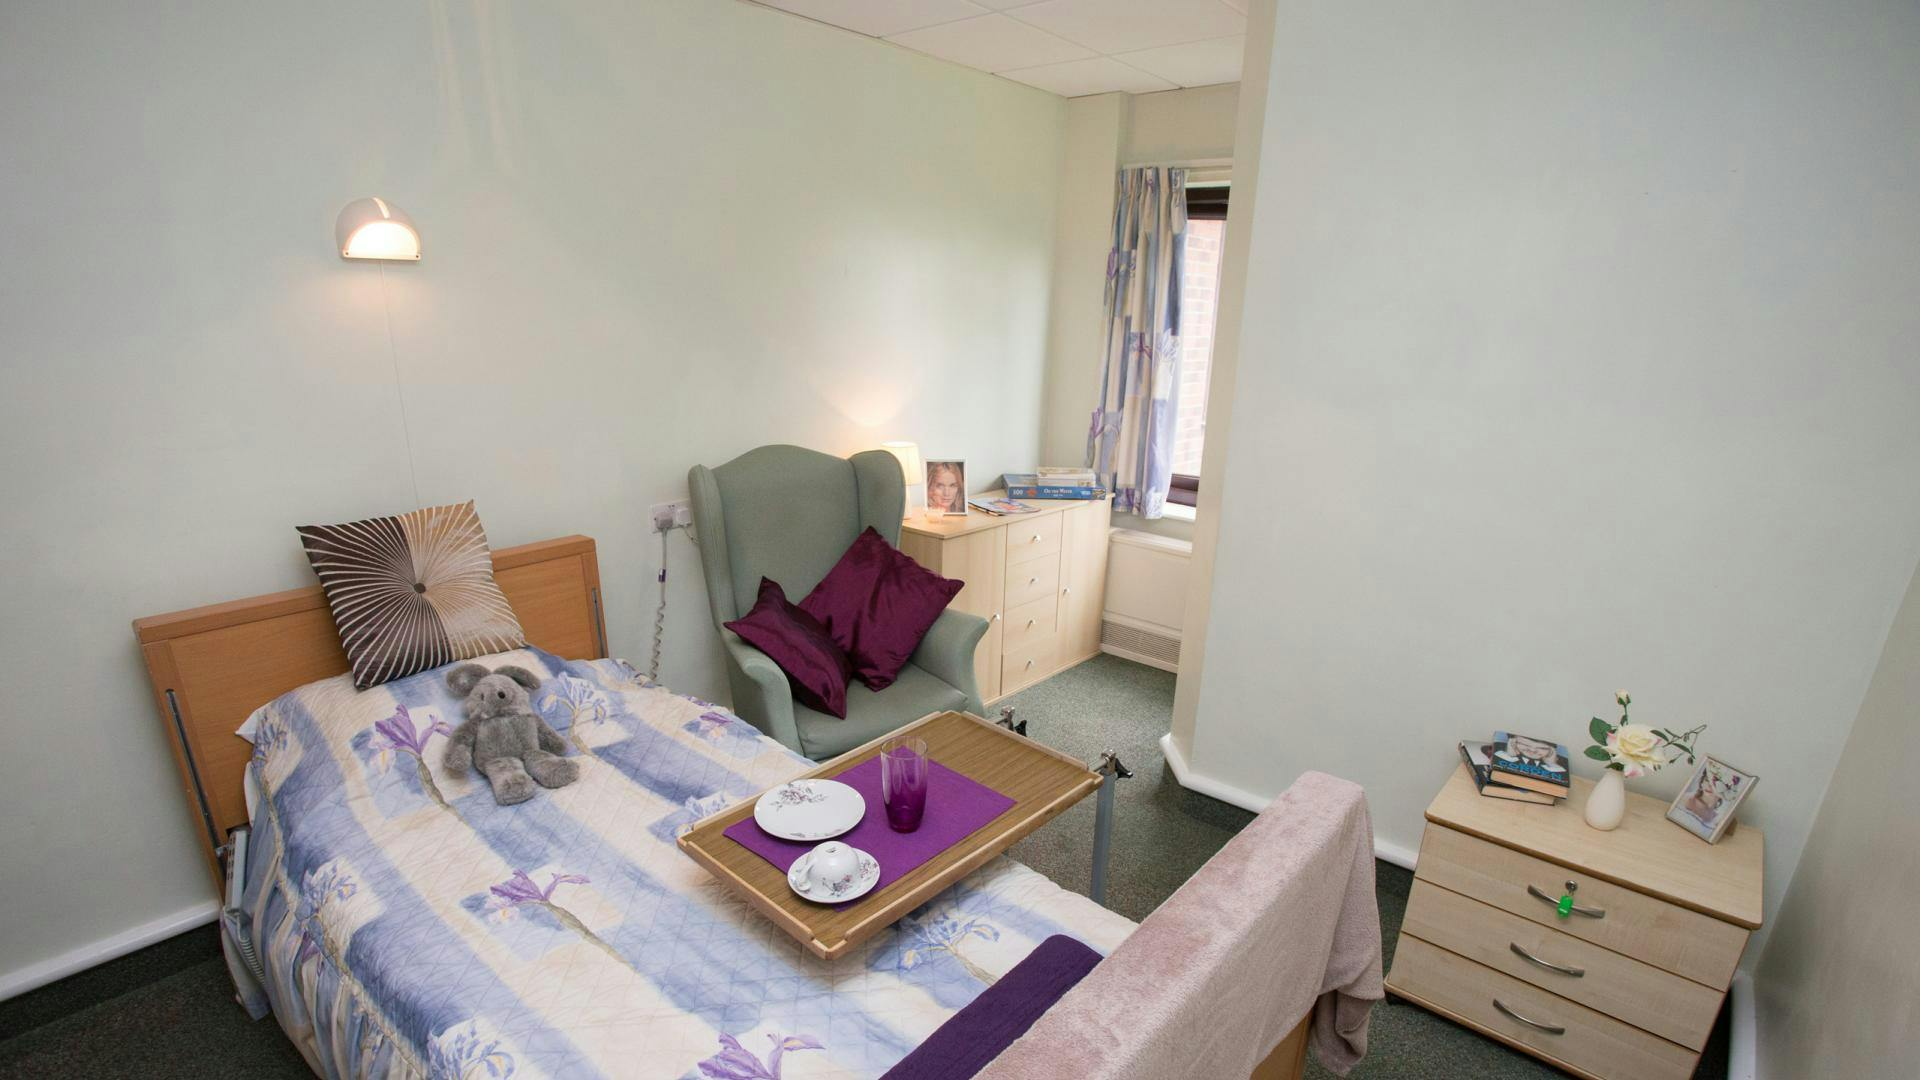 Bedroom at Henlow Court Care Home in Dursley, Gloucestershire